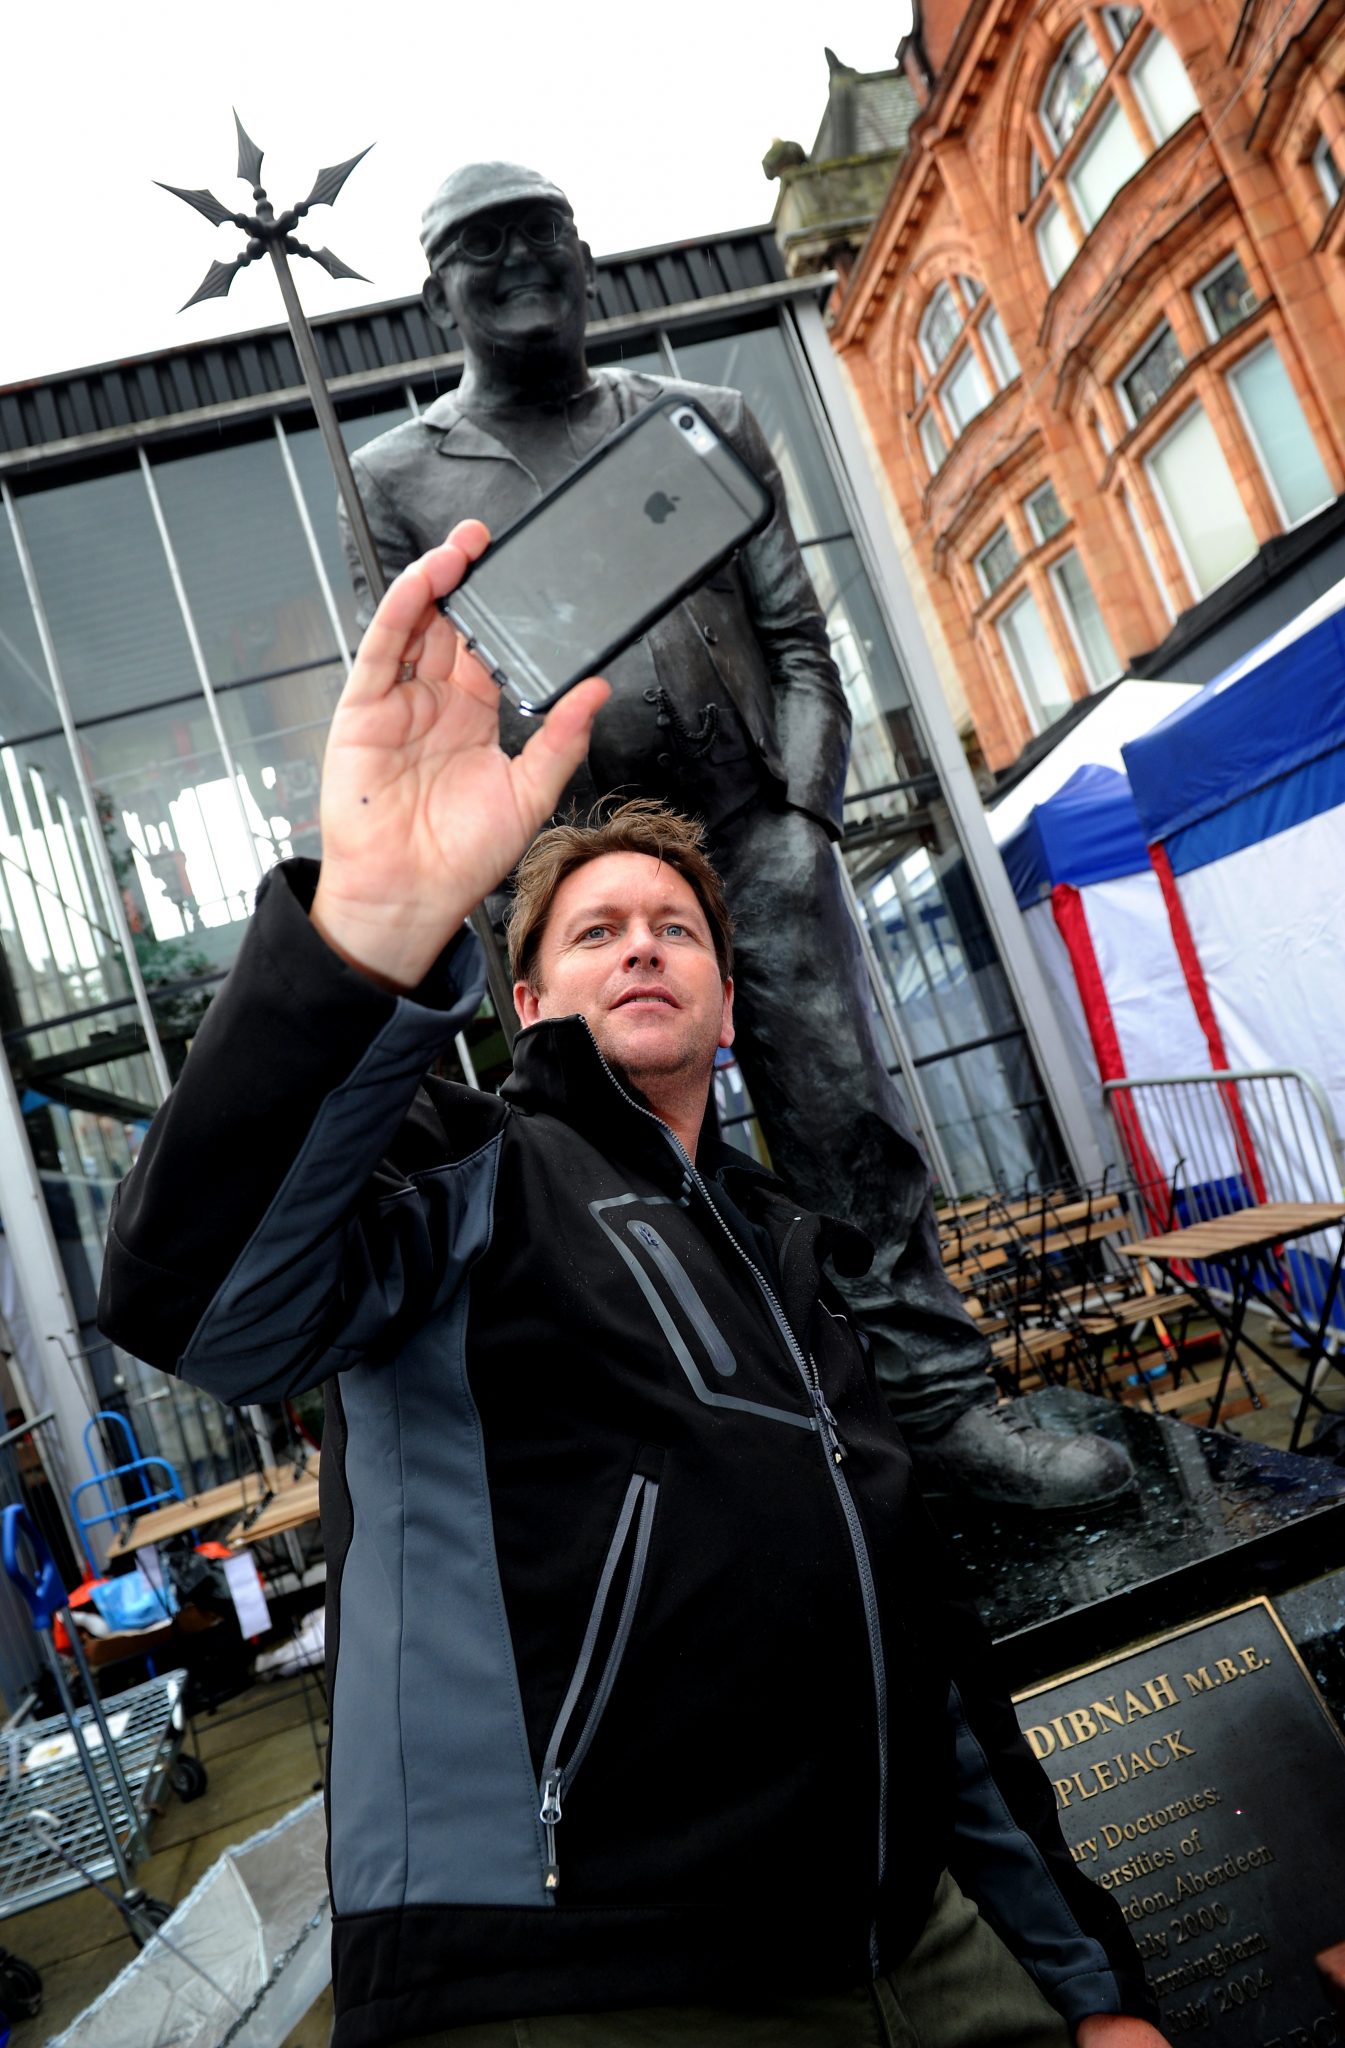 The 10th annual Bolton Food and Drink Festival, Victoria Square, Bolton, Lancashire. Star attraction on the final day was chef James Martin, who couldn't resist a selfie with the Fred Dinah statue in the town. Picture by Paul Heyes, Monday August 31, 2015.